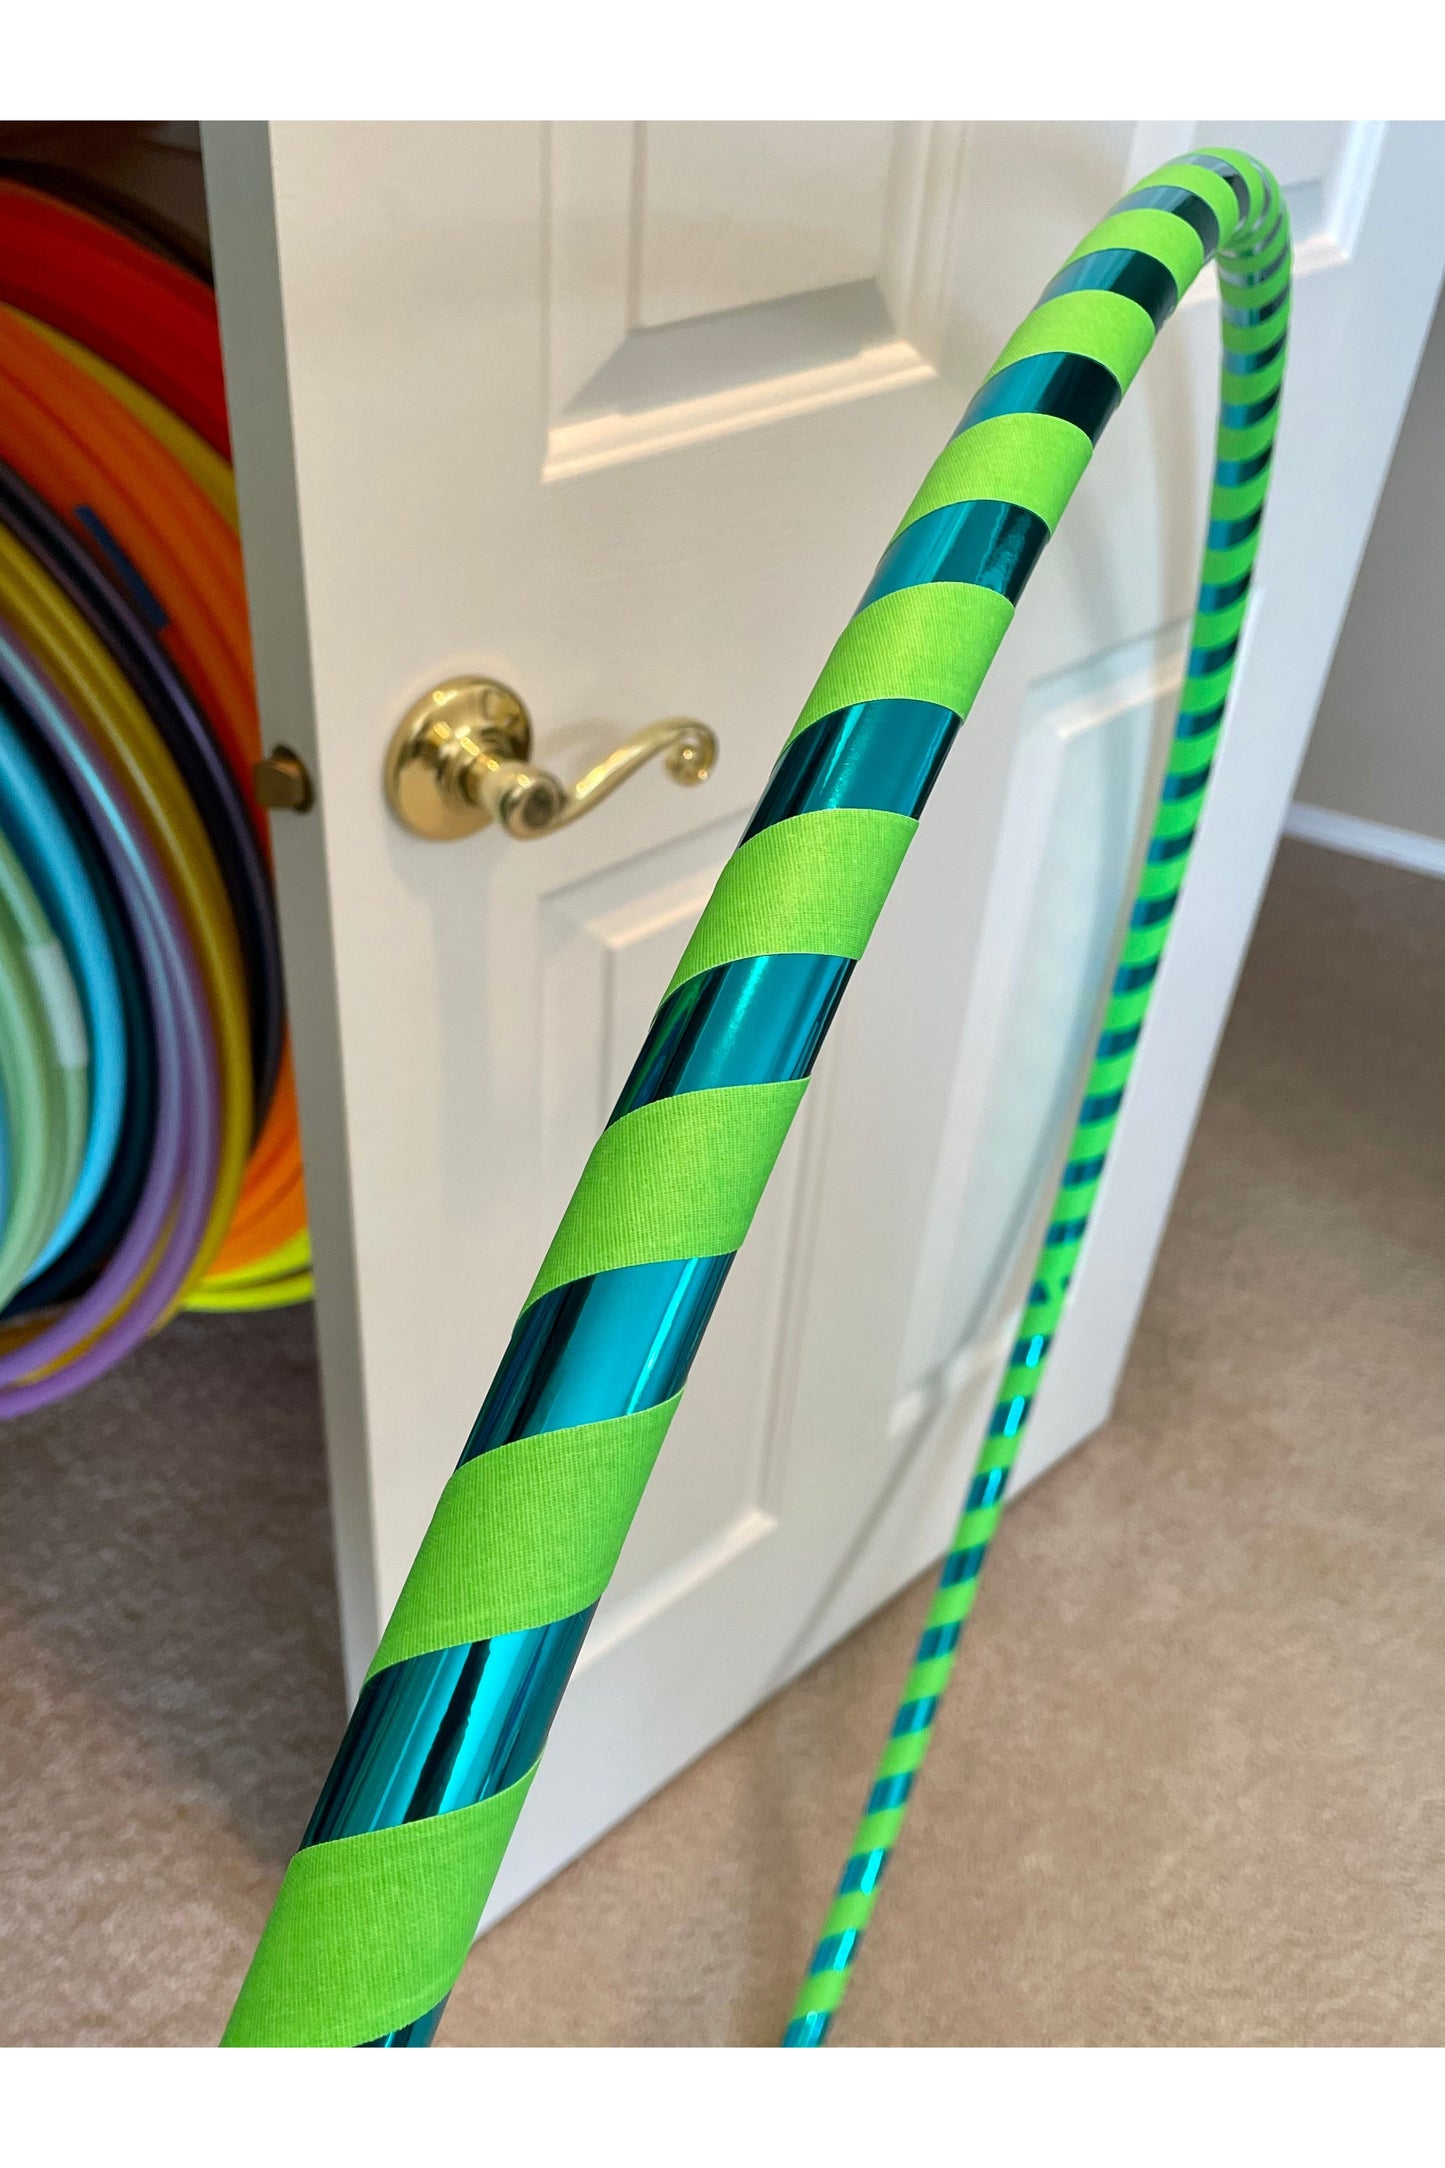 Beginner & Weighted Fitness Taped Beginner Hula Hoops | Mirror, Holographic, & Prism Deco Tapes + Gaffer Grip Tape